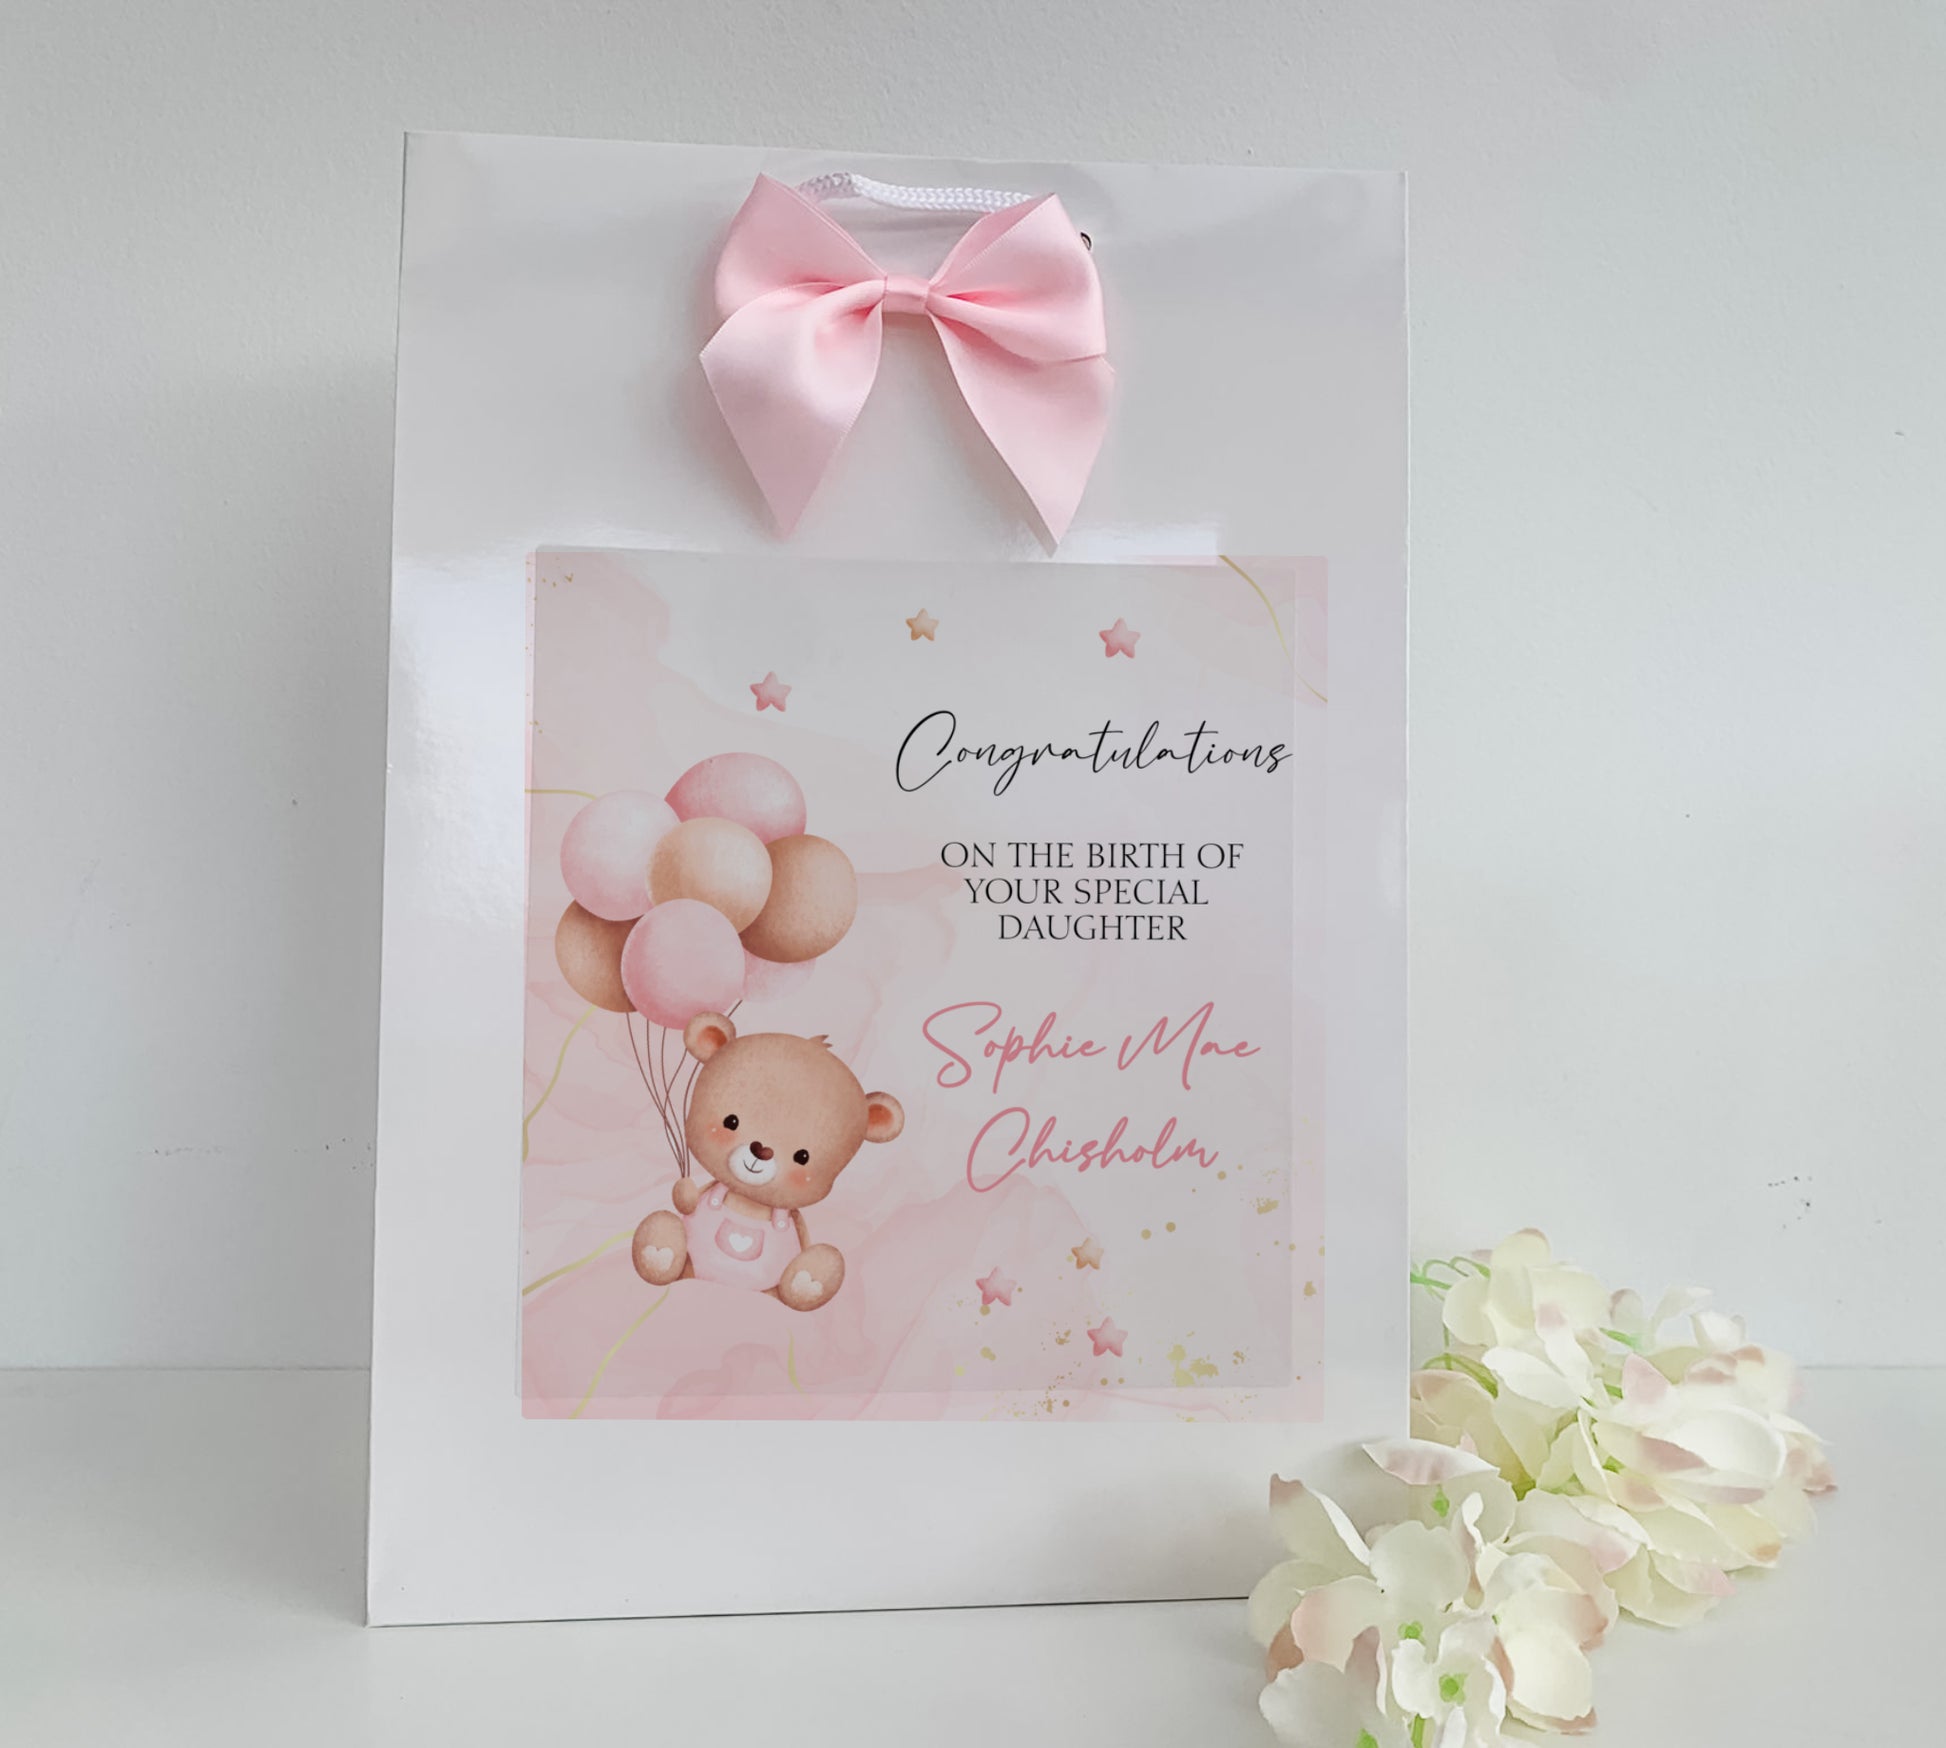 a greeting card with a teddy bear holding balloons